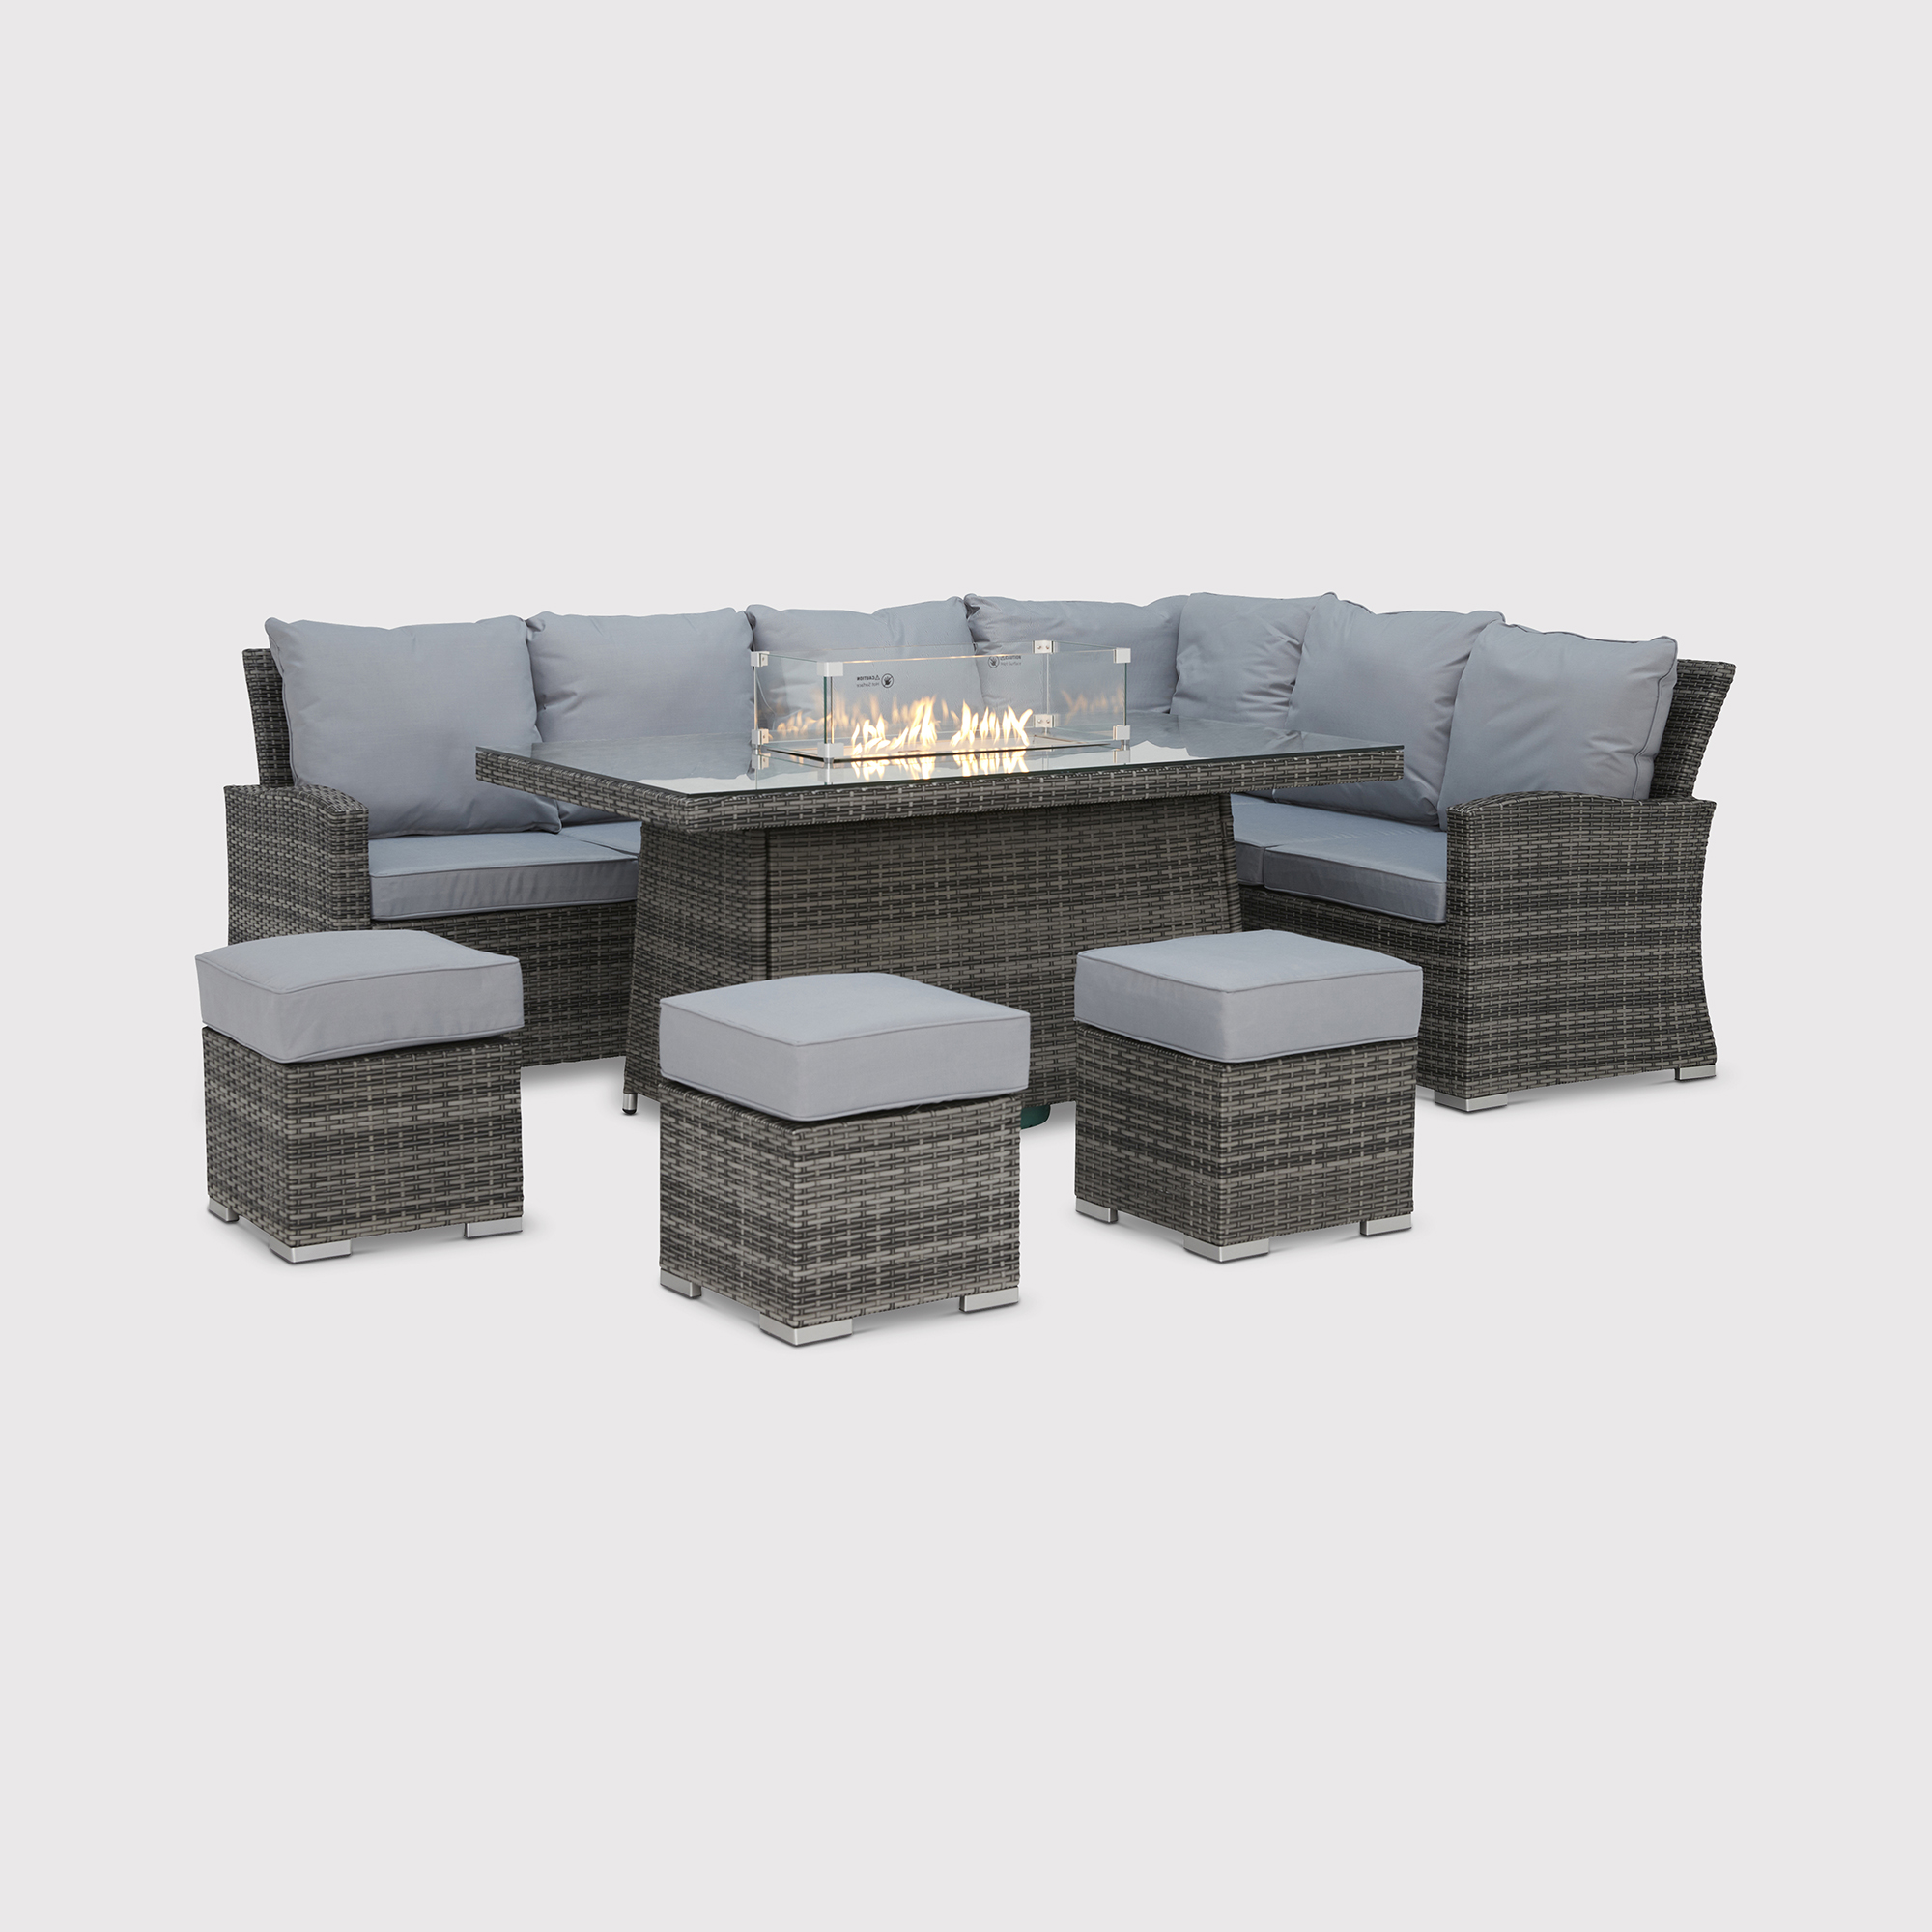 Cresswell Corner Dining Set With Fire Pit, Grey | Barker & Stonehouse